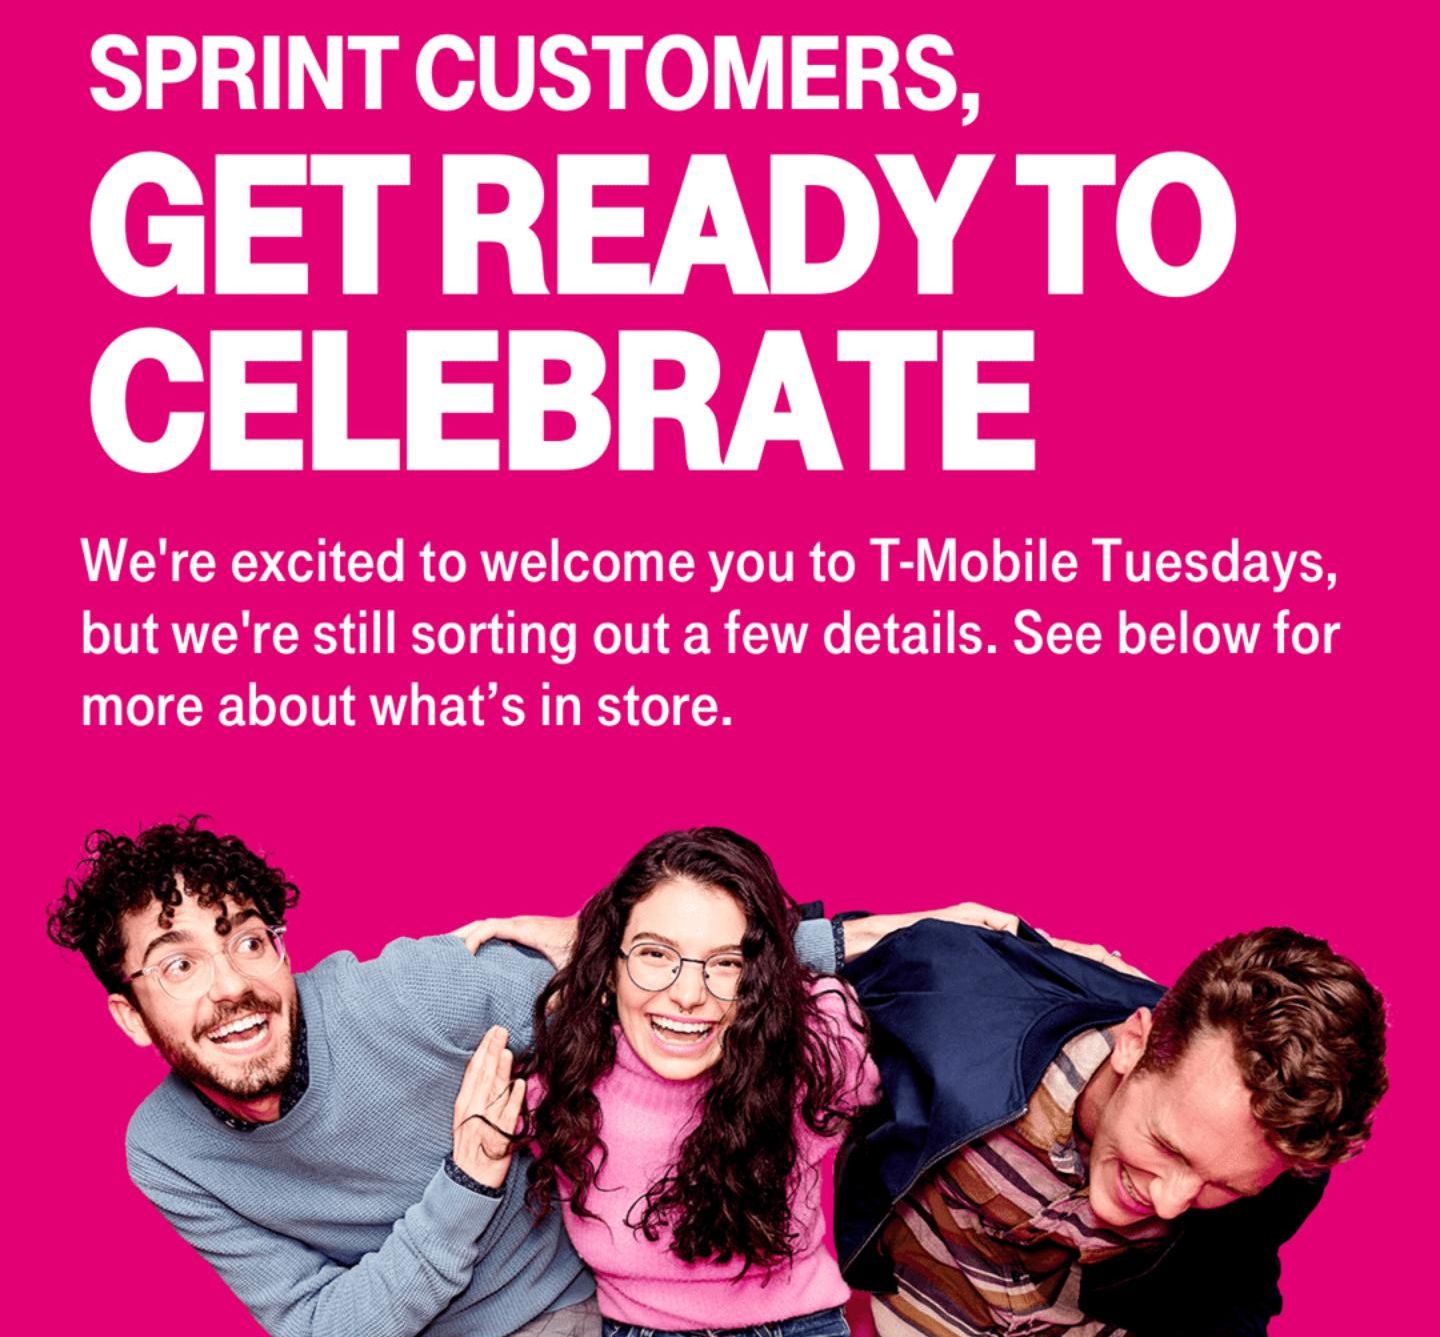 T-Mobile Tuesdays are coming to Sprint next week